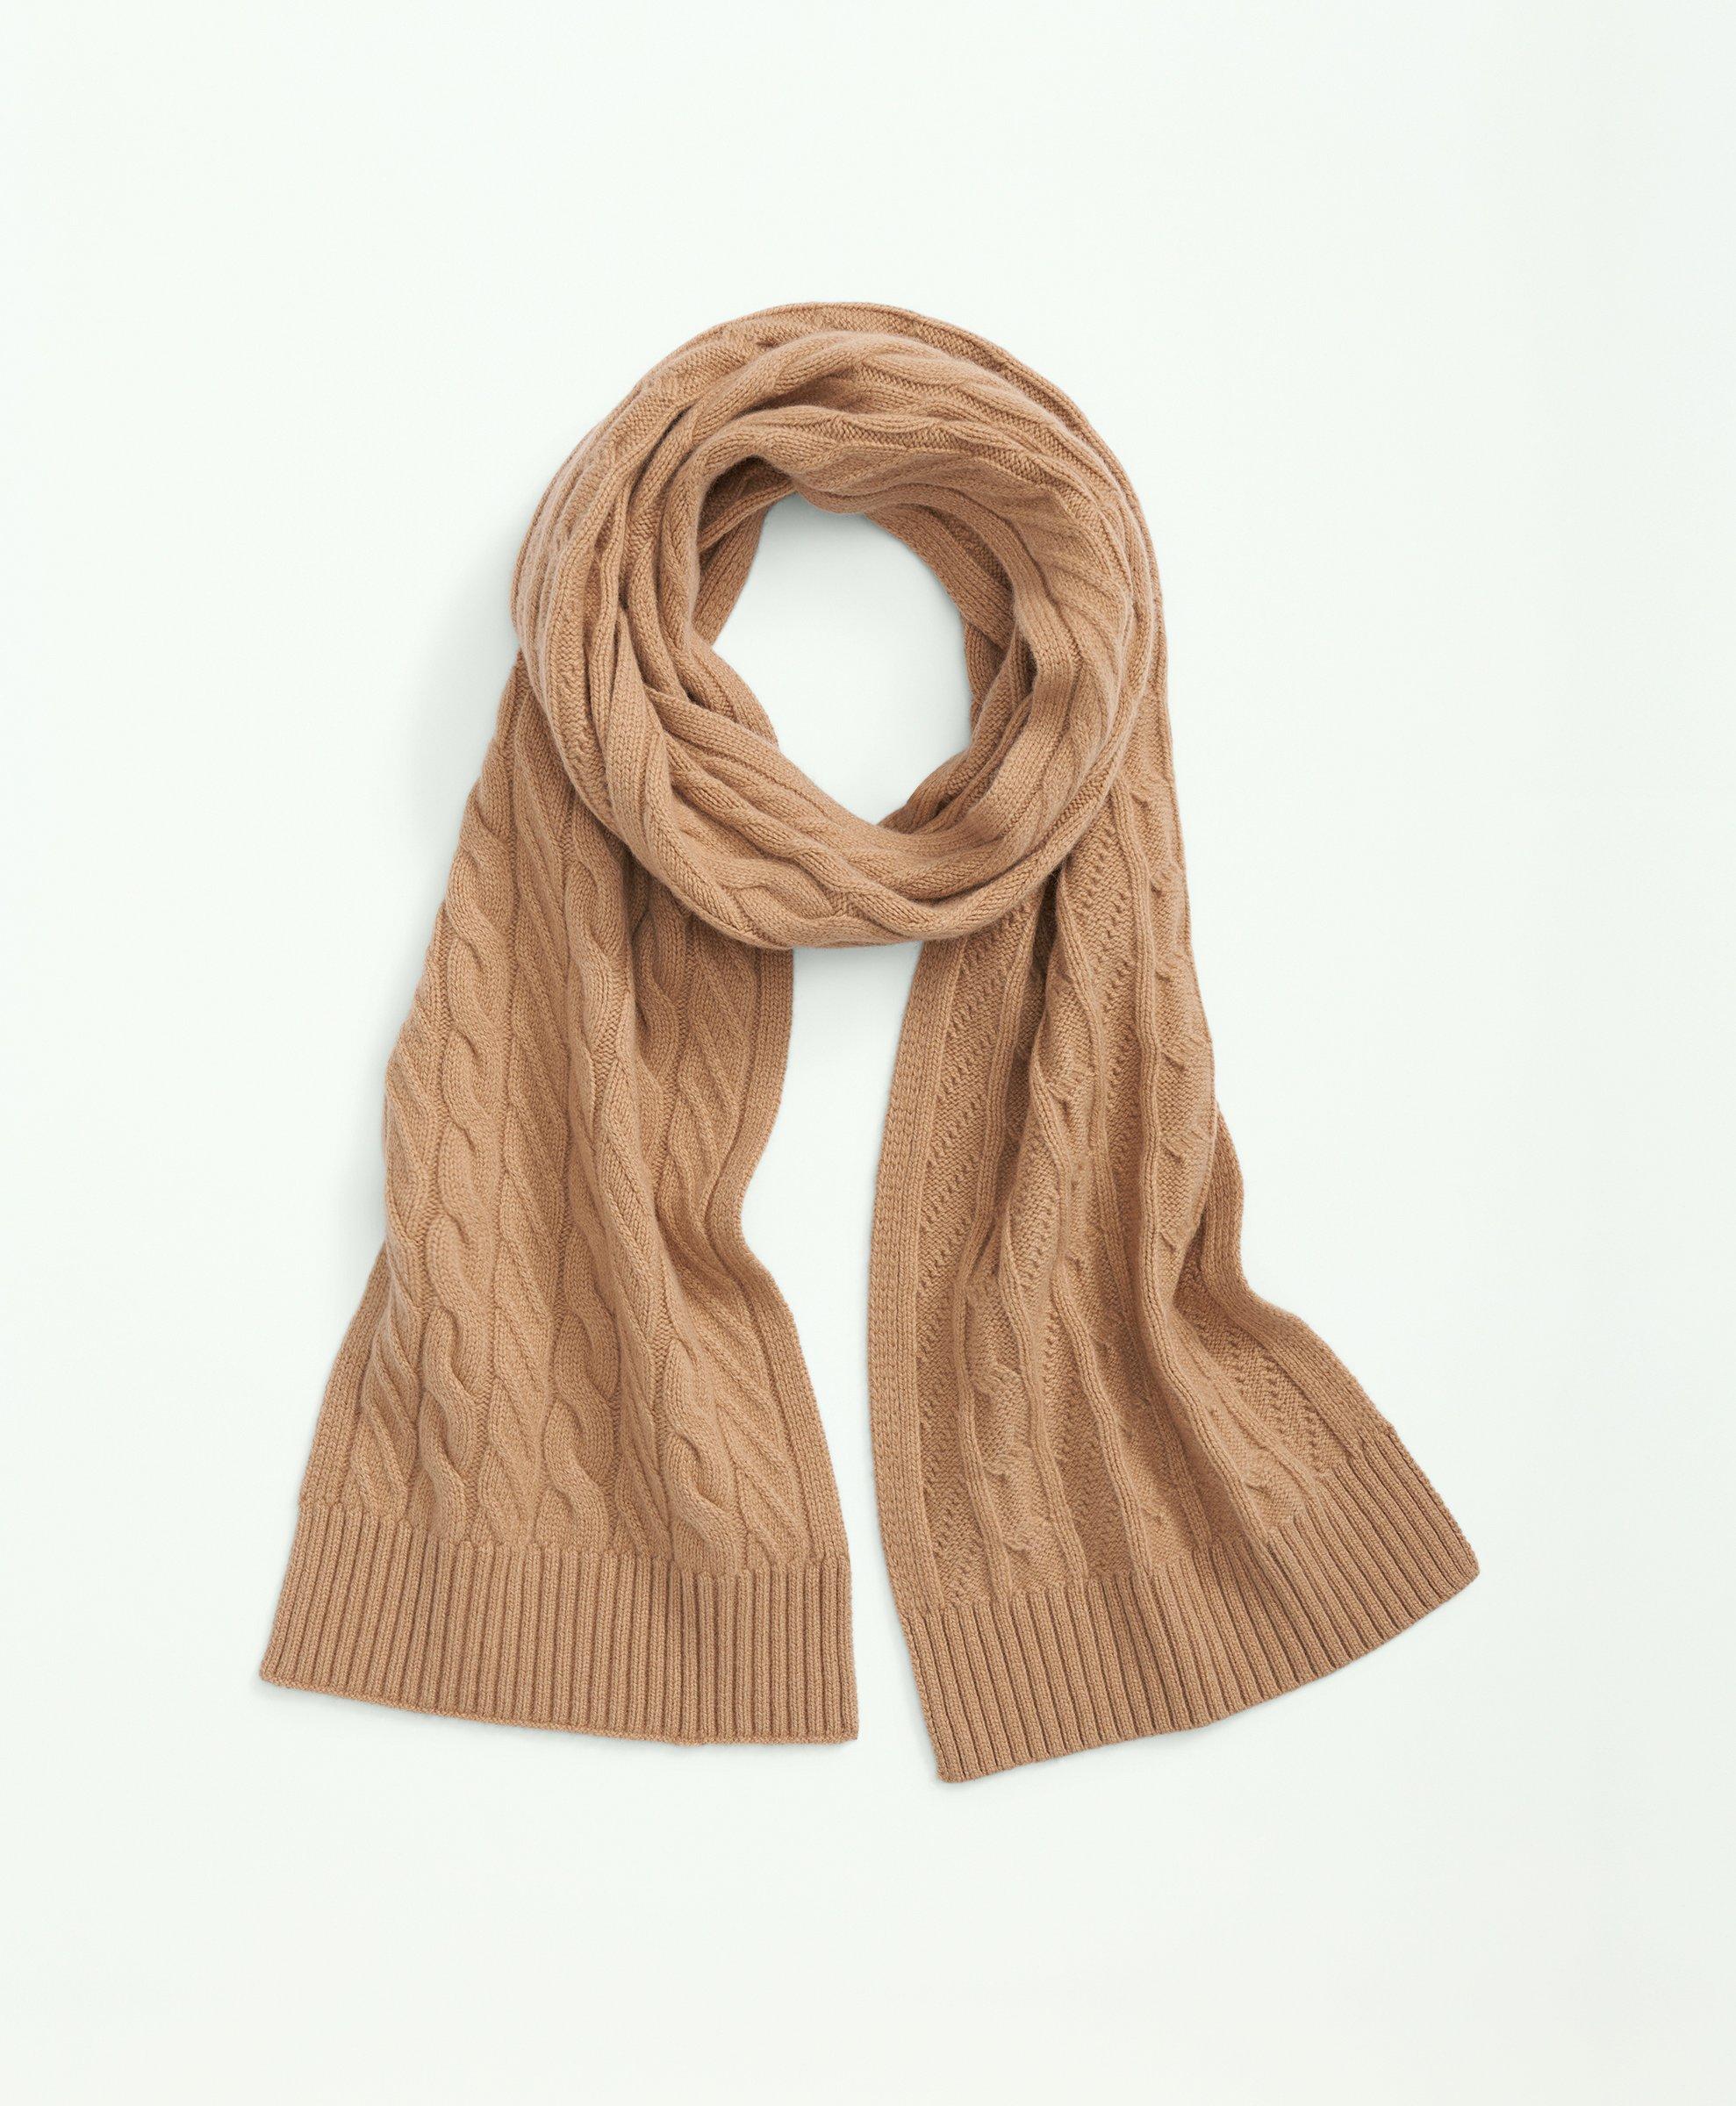 Merino Wool and Cashmere Blend Cable Knit Scarf, image 1